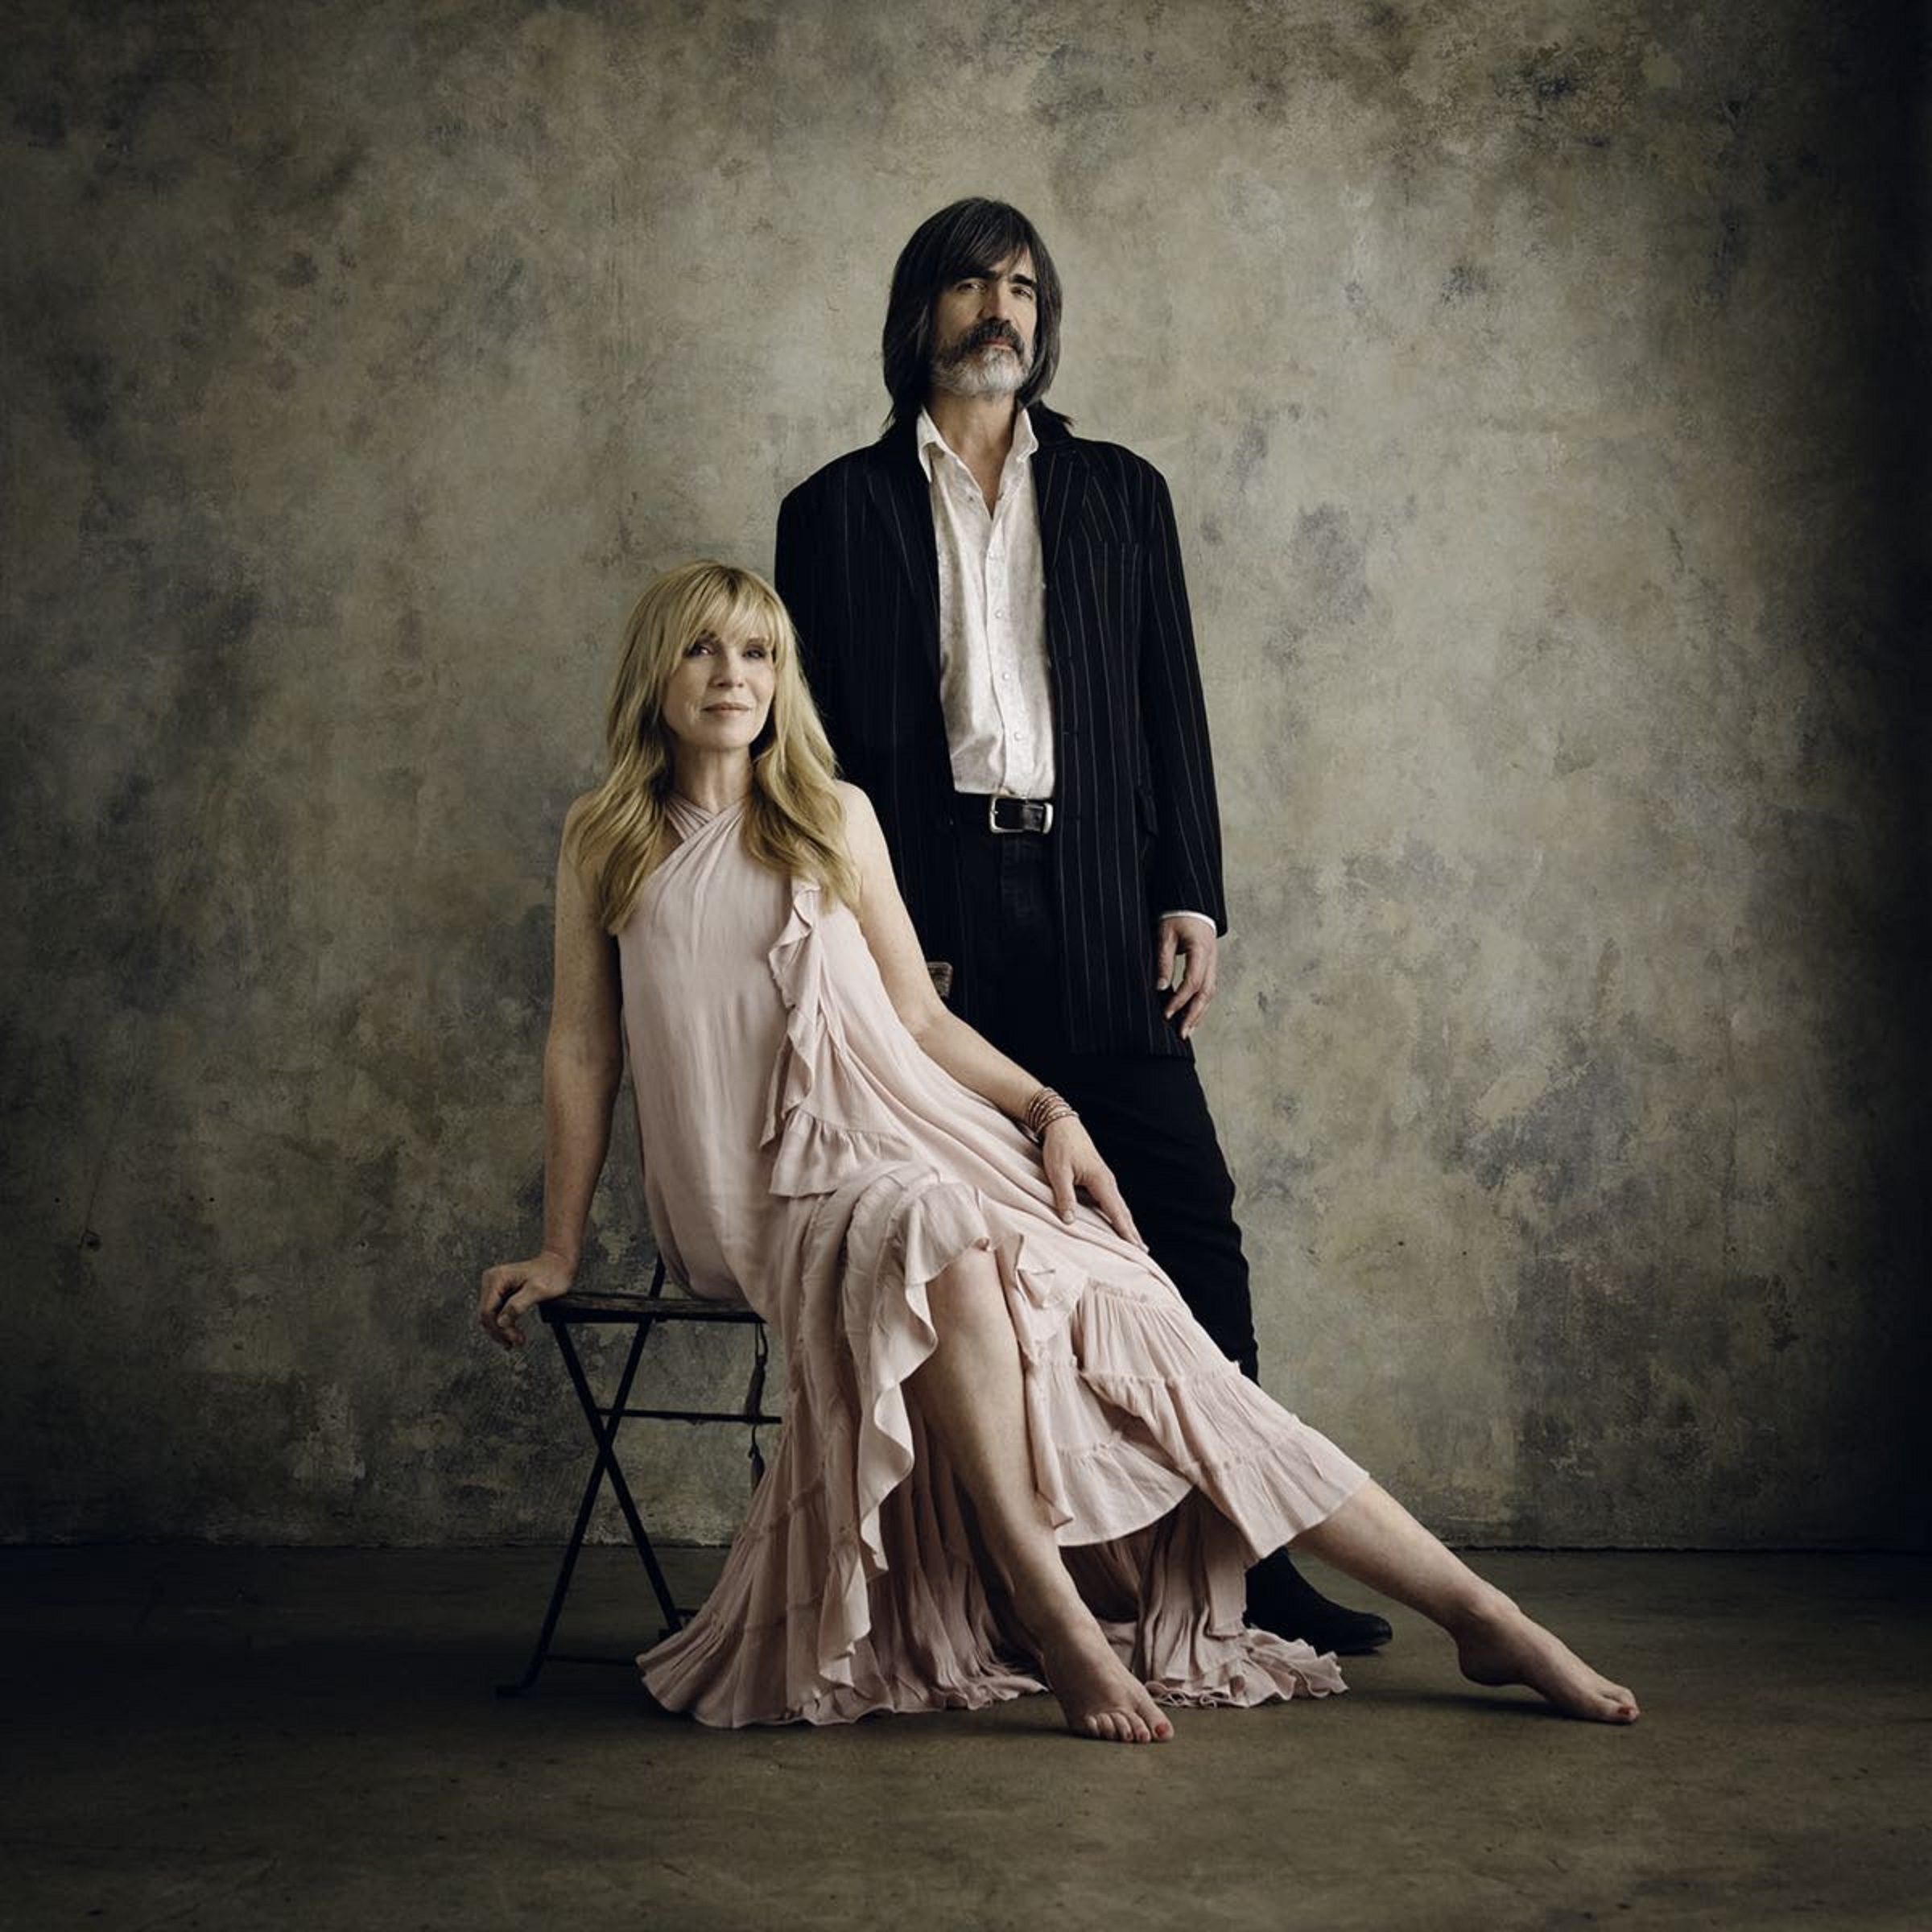 Larry Campbell & Teresa Williams Share "Darling Be Home Soon" & Announce 2023 Tour Dates